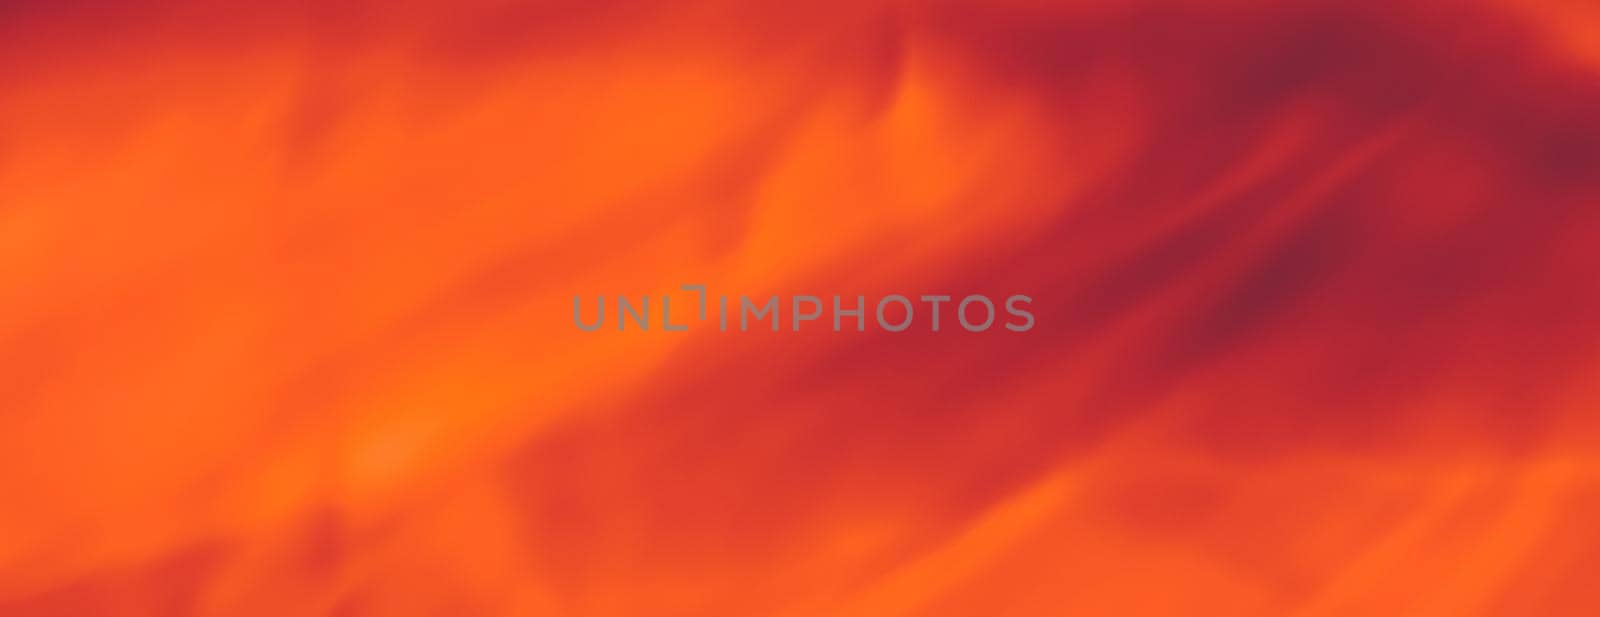 Holiday branding, beauty glamour and cyber backgrounds concept - Orange abstract art background, fire flame texture and wave lines for classic luxury design